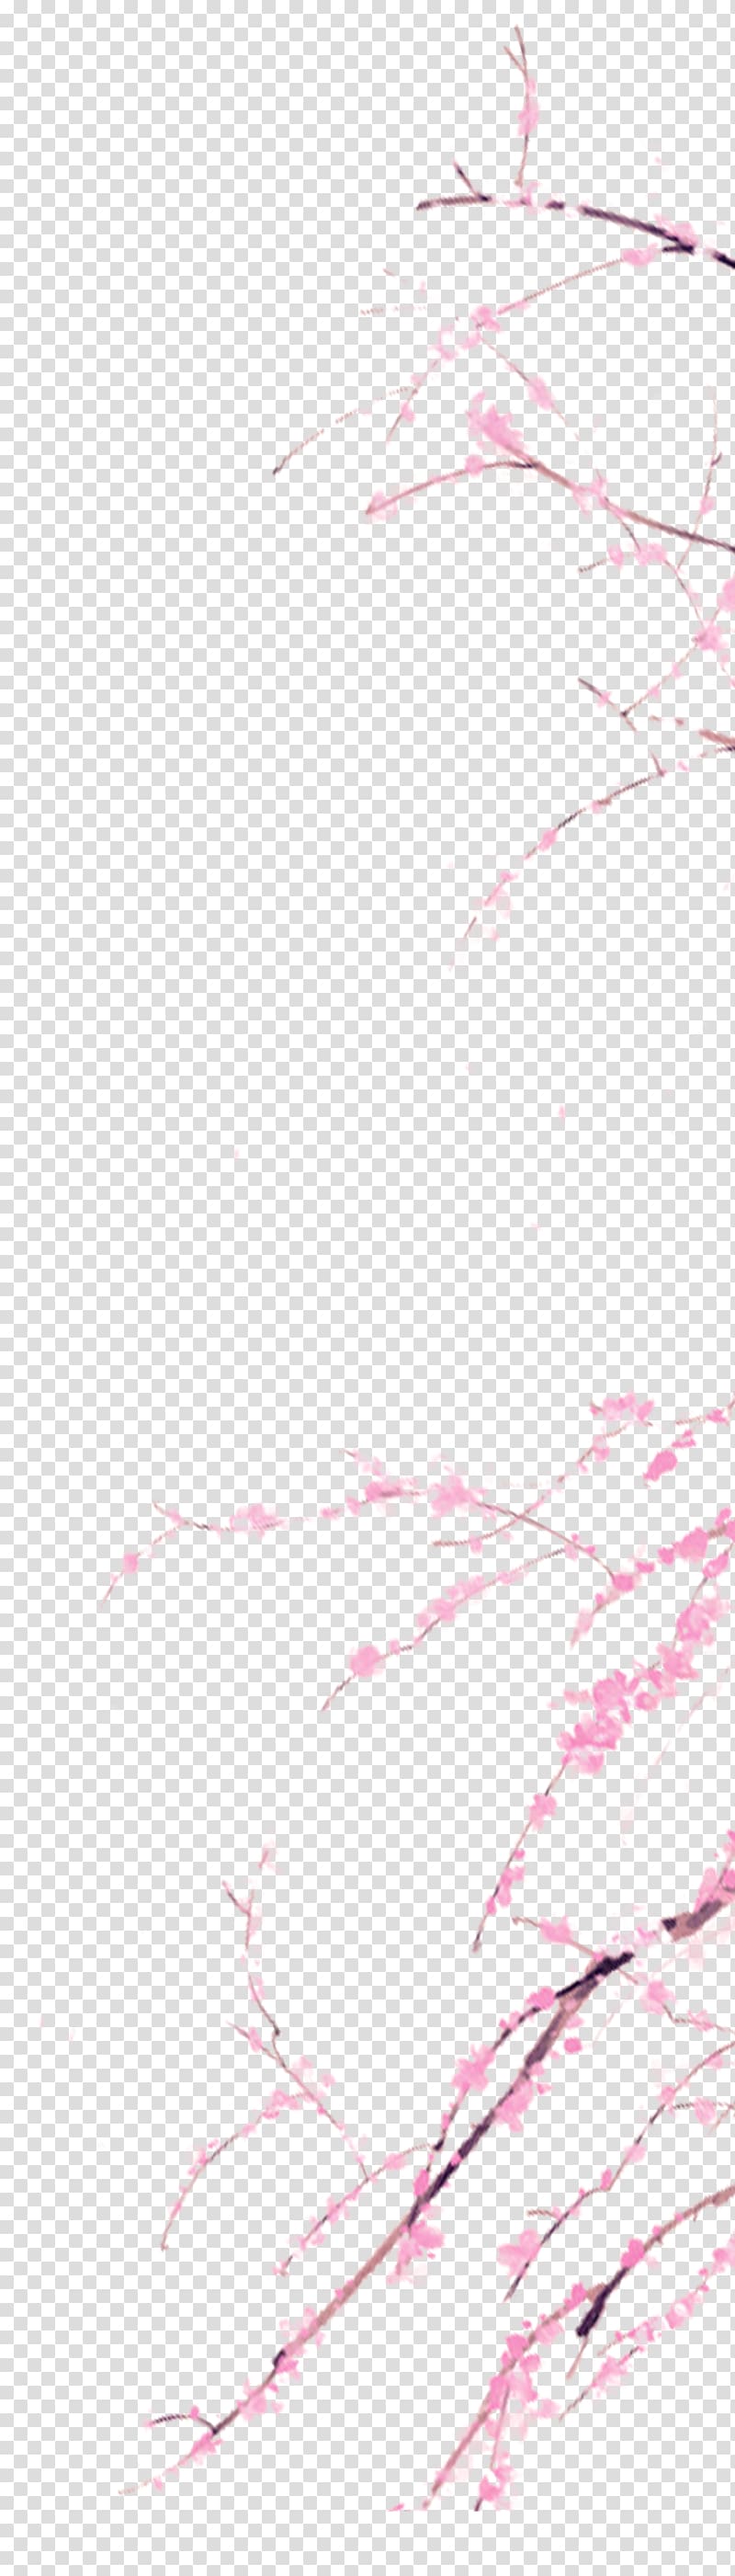 Watercolor painting Pink, Pink watercolor peach branches decorative patterns transparent background PNG clipart